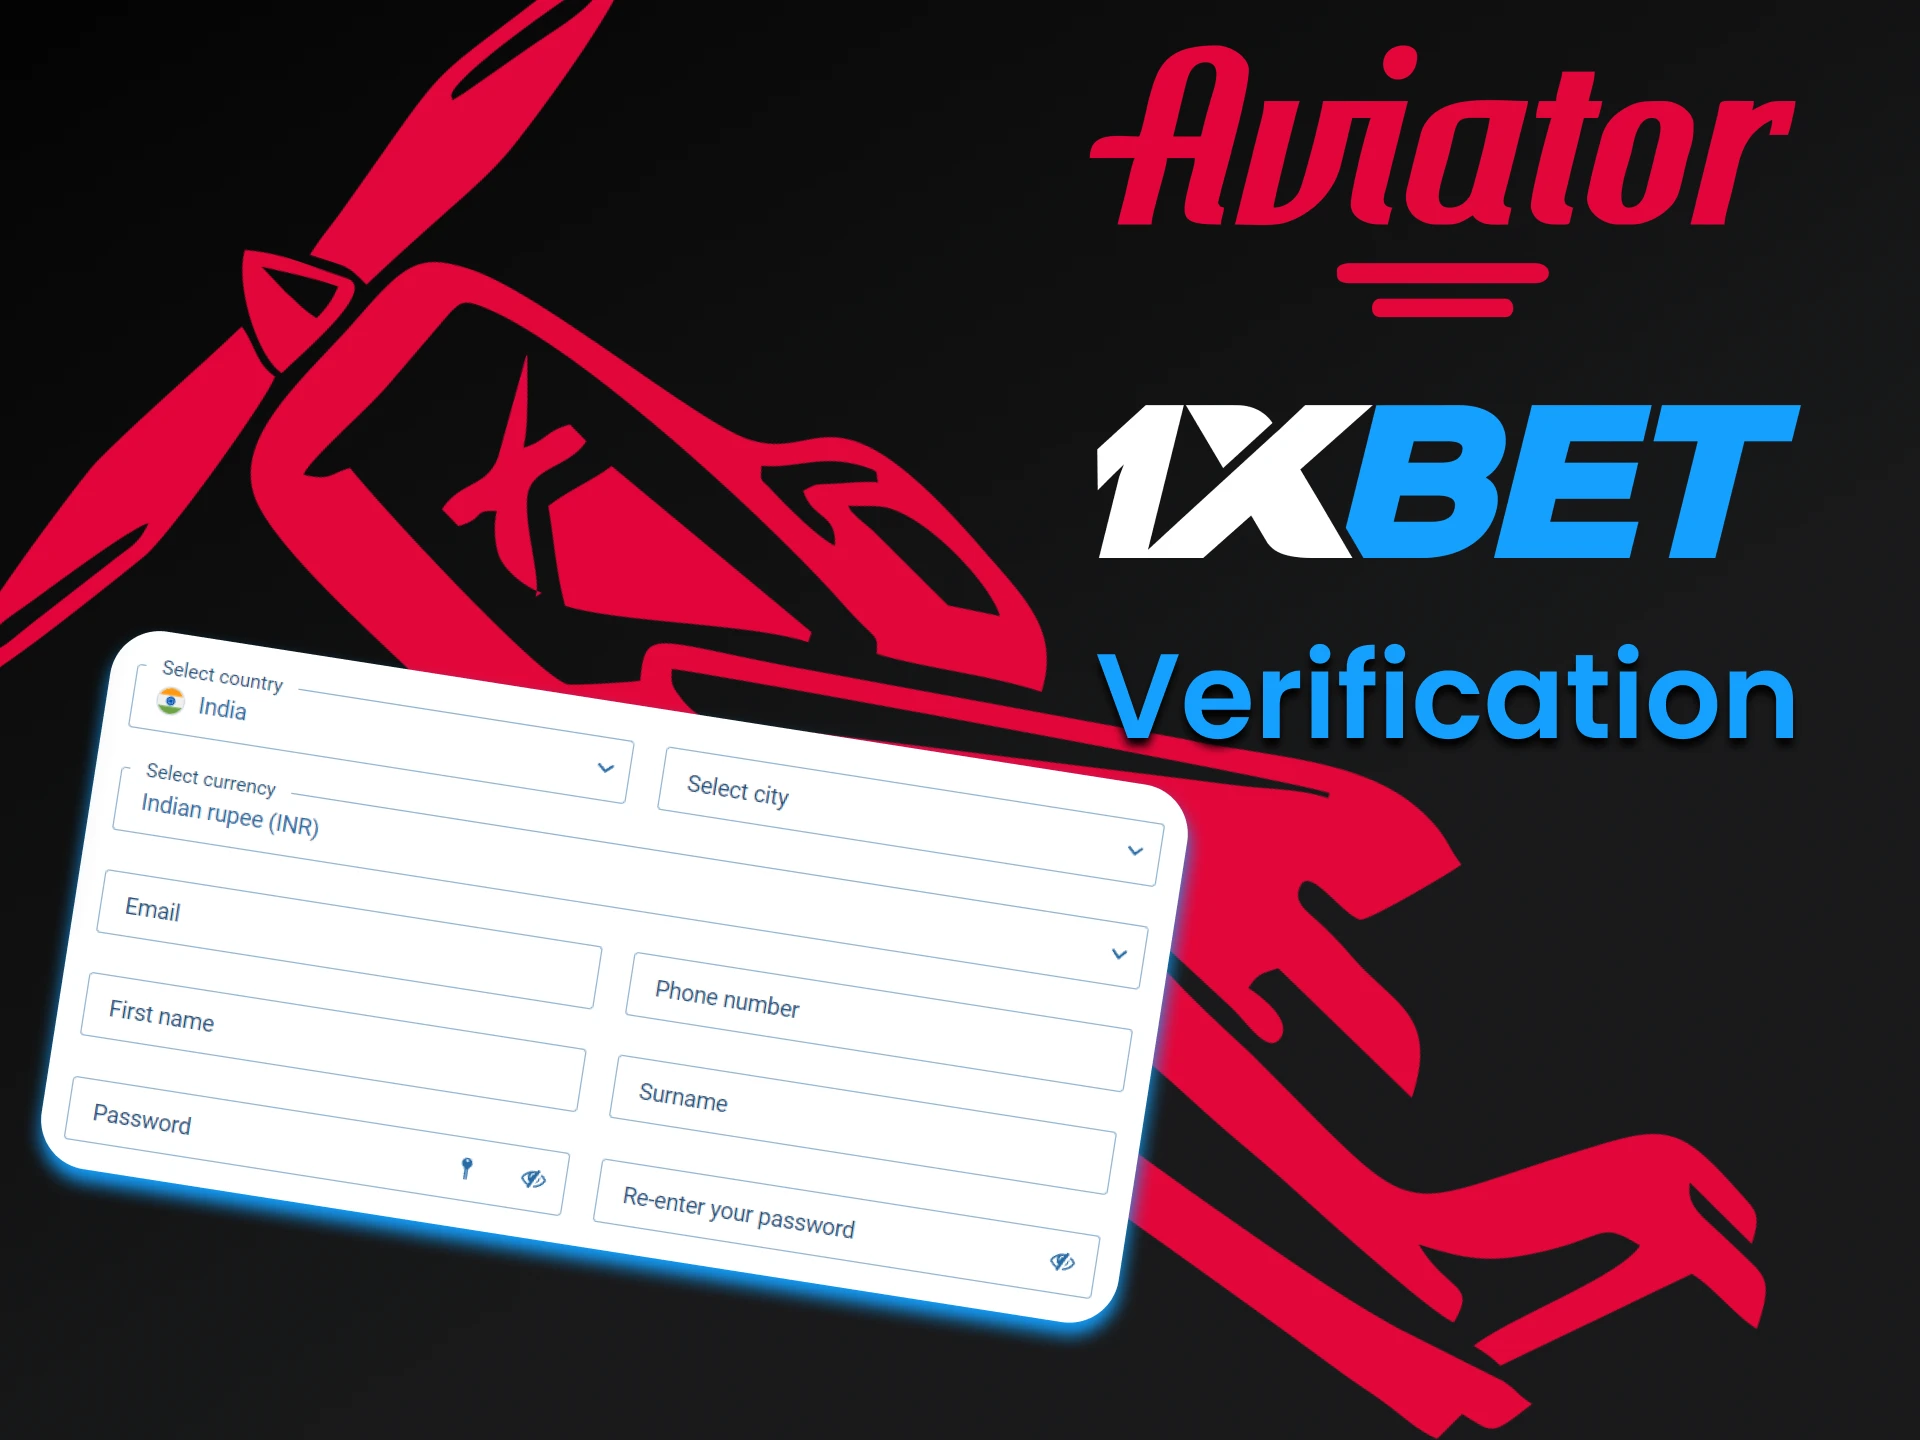 Enter certain data to play Aviator at 1xbet.